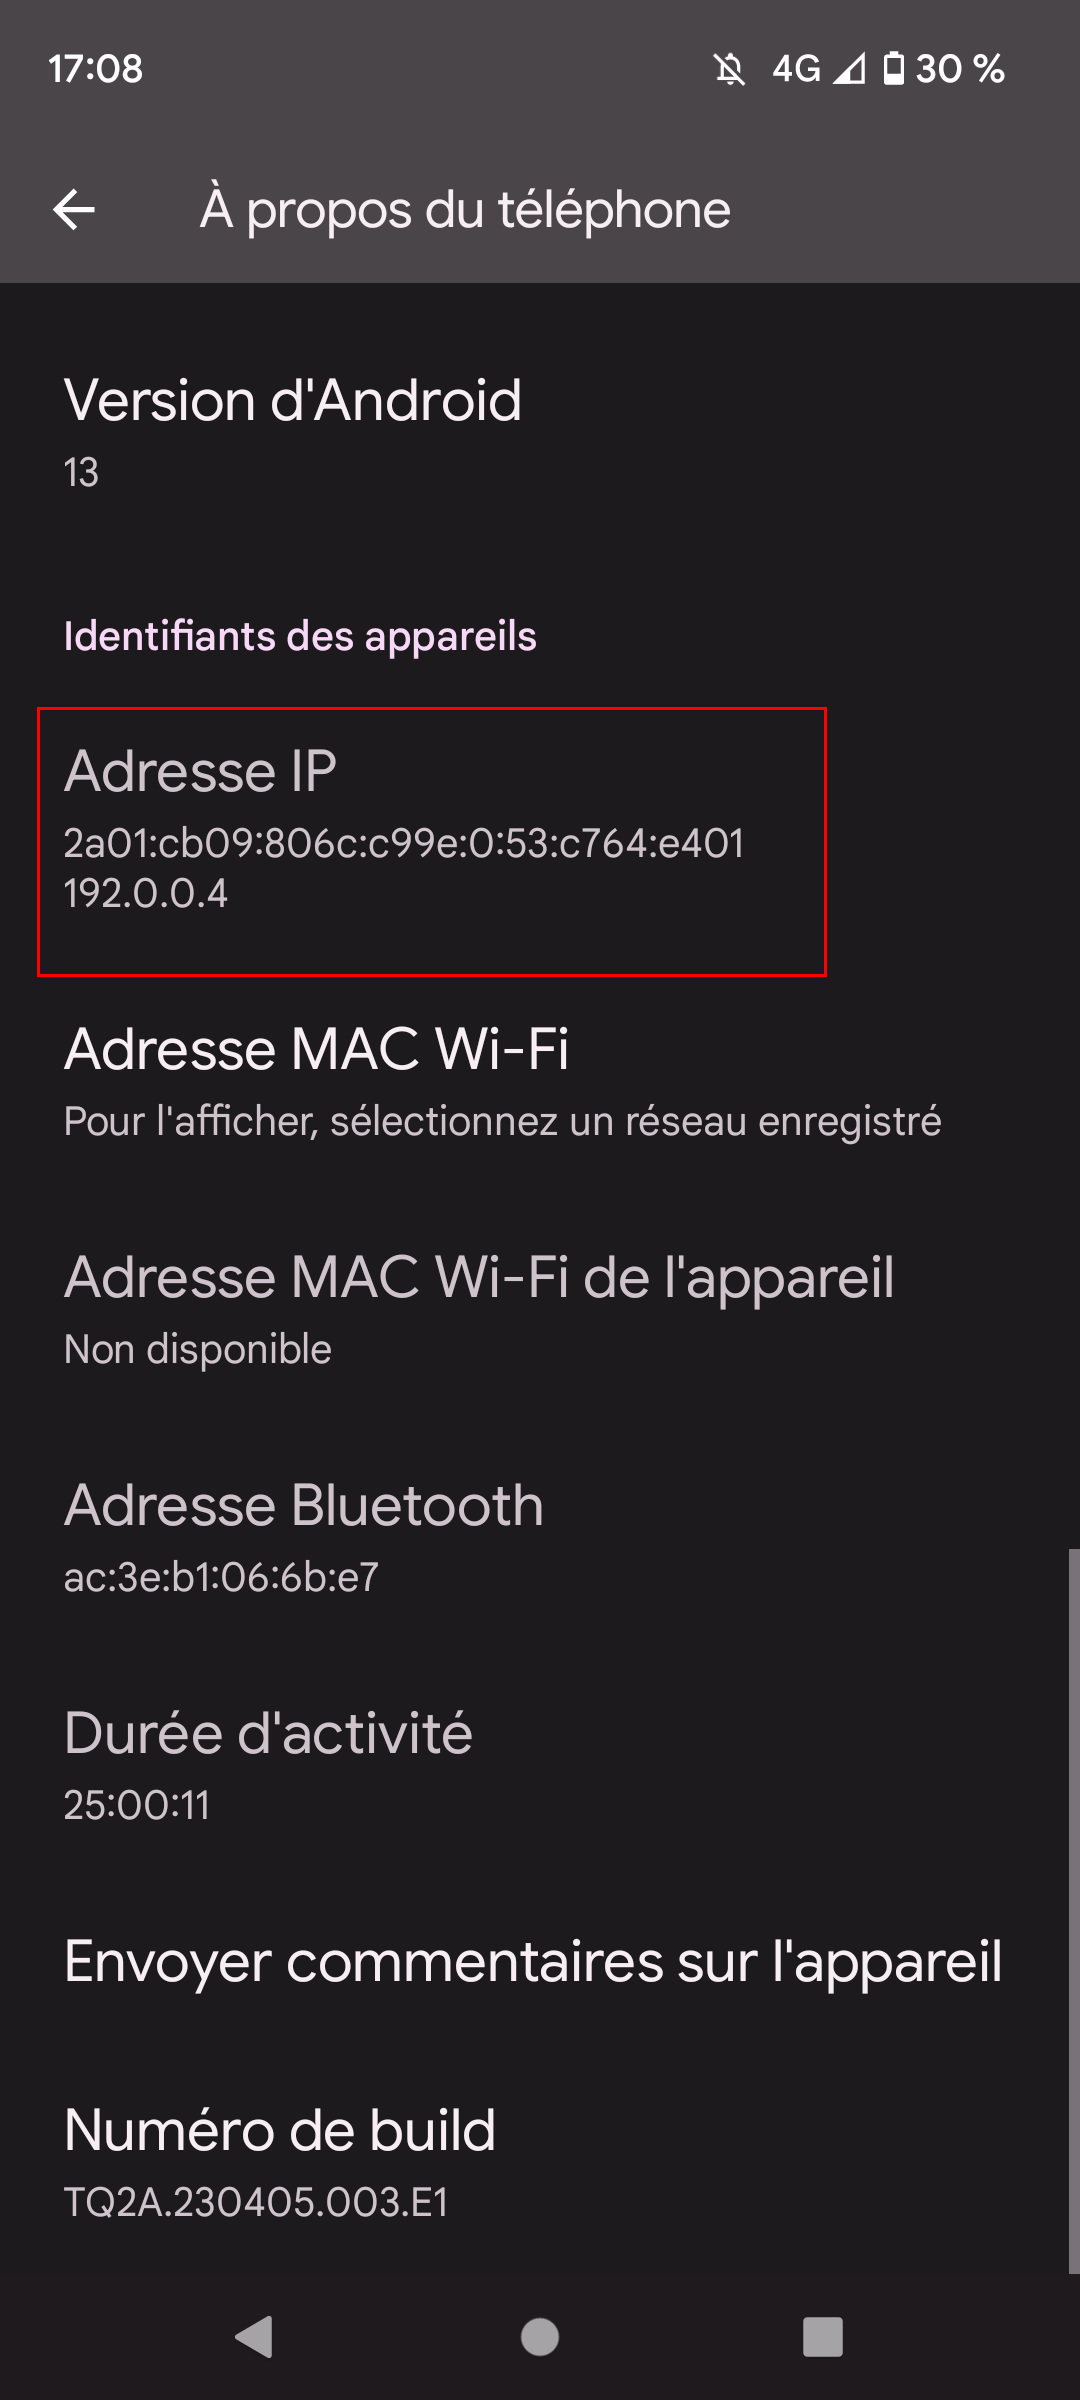 Android - Adresse IP mobile